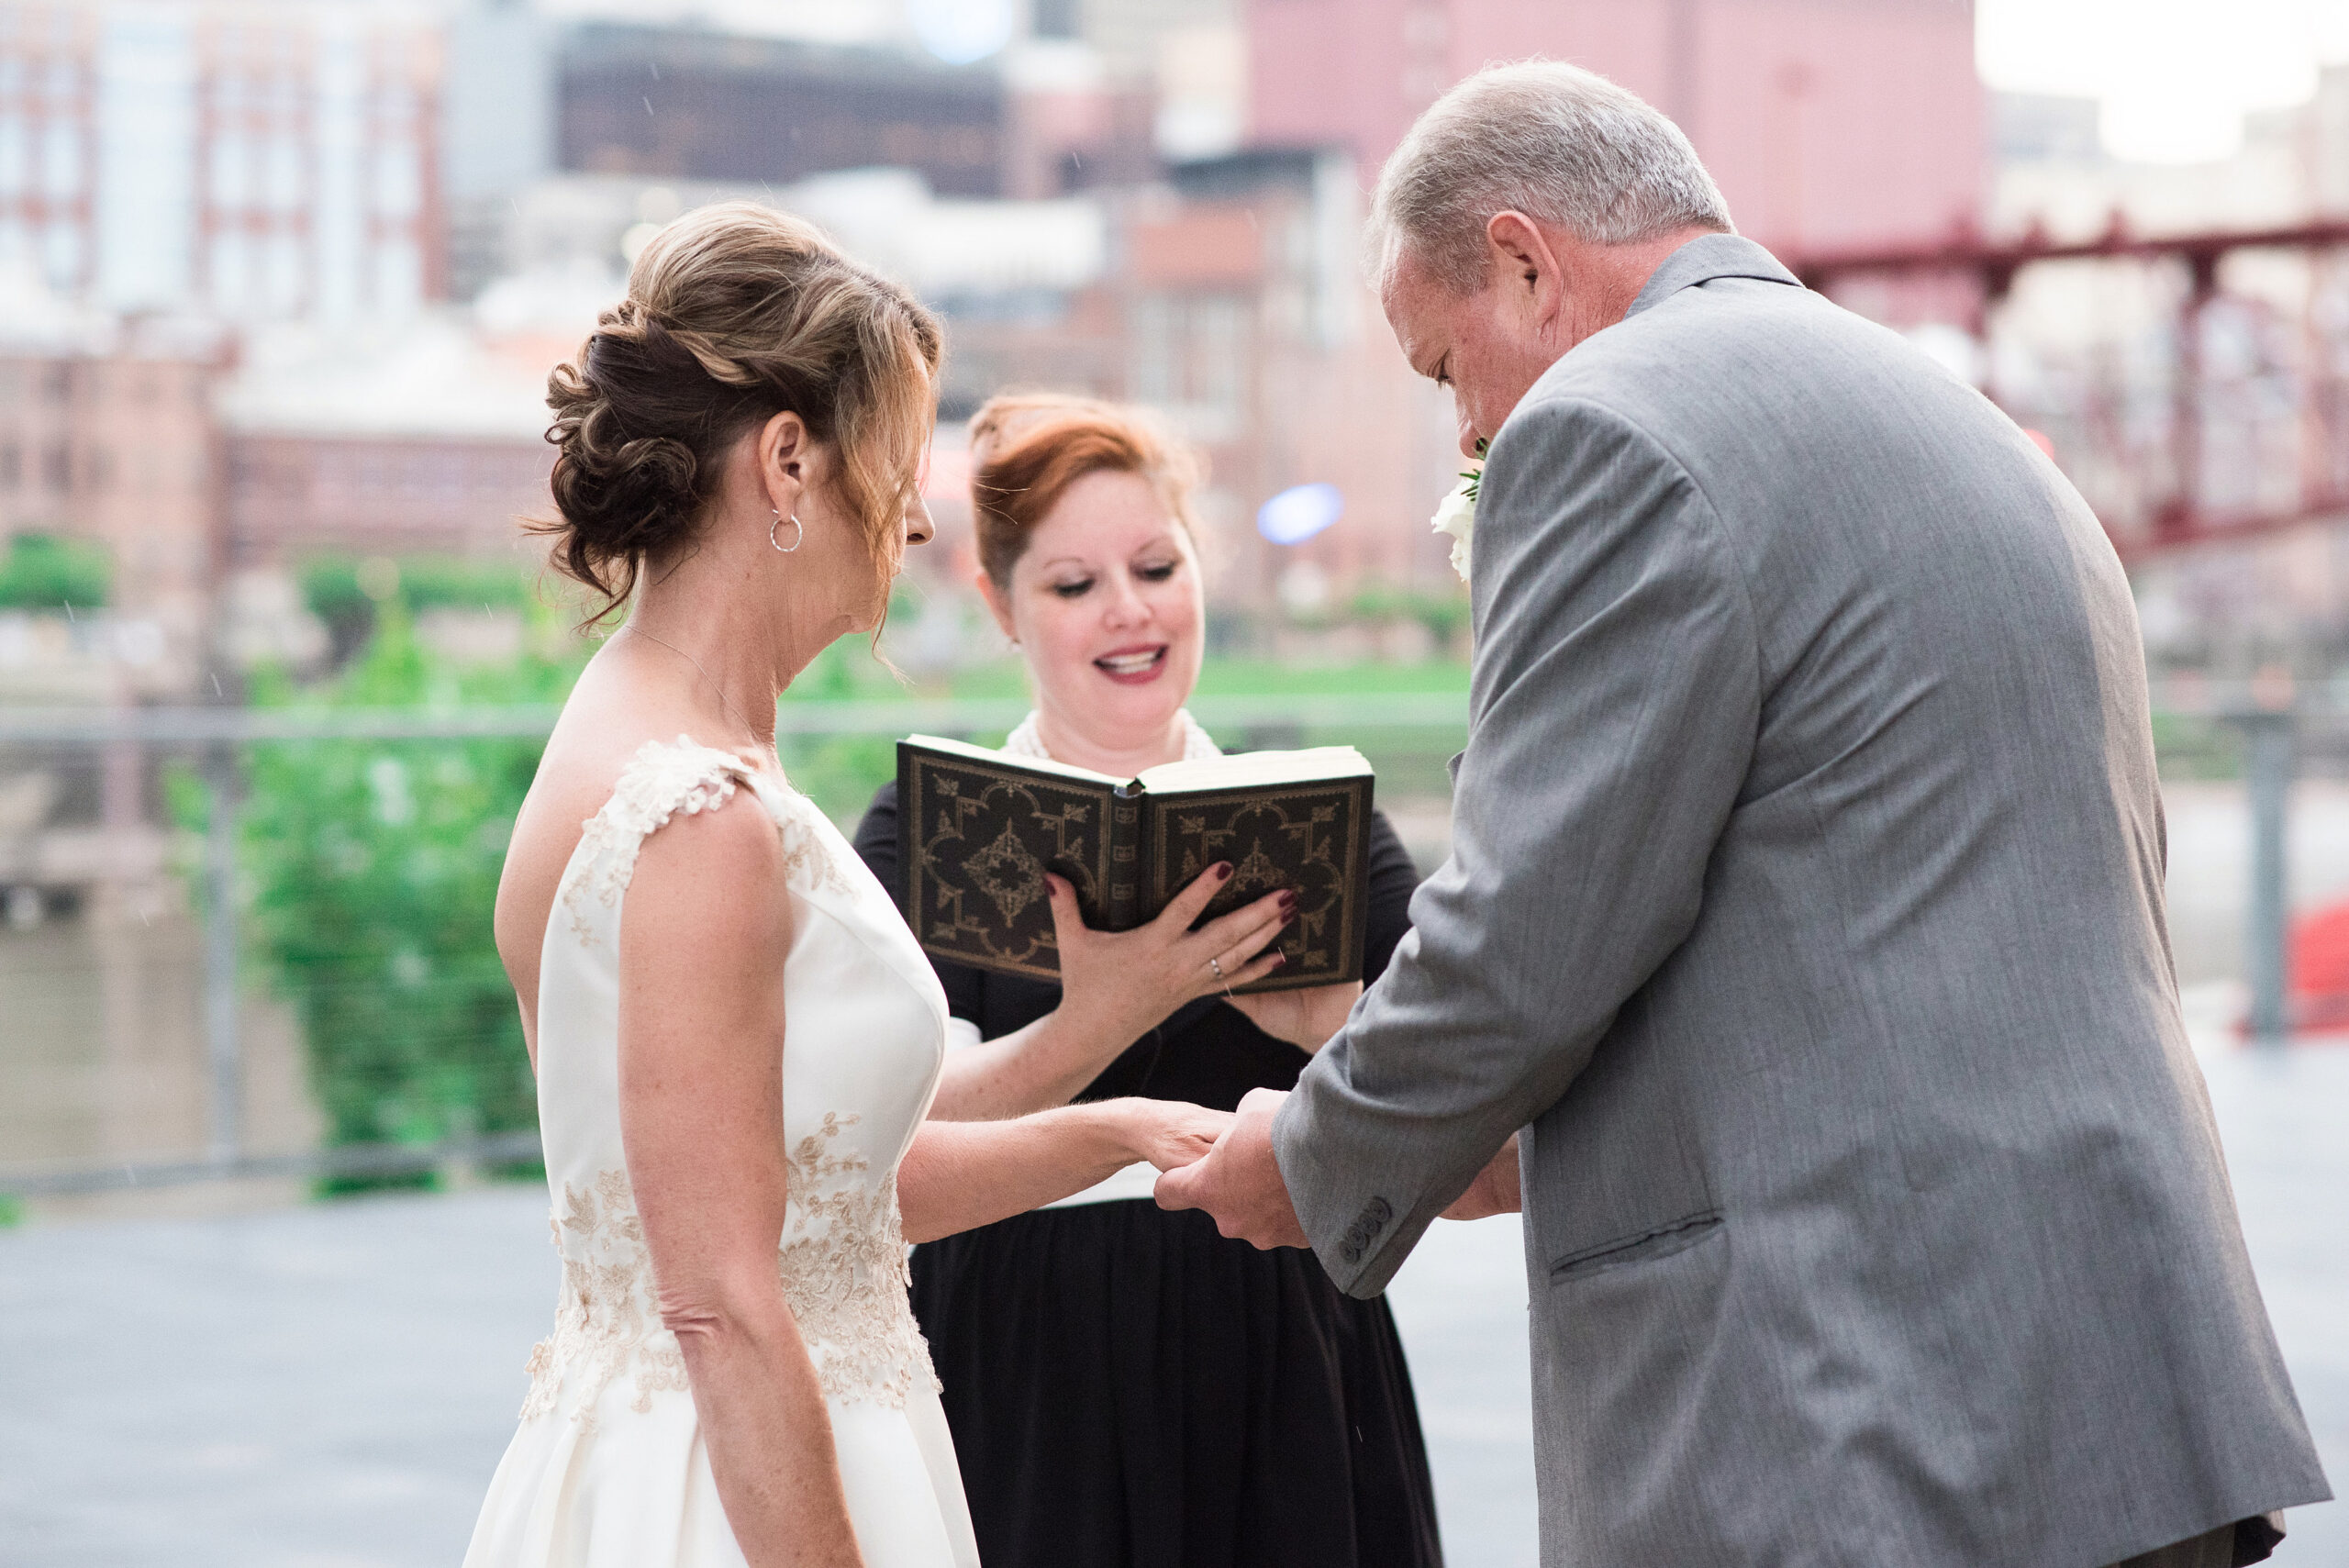 The officiant stands before the bride and groom wearing a black dress holding a leather bound book with gold detail. The bride holds out her hand as the groom places the wedding ring on her finger. The bride is wearing a white sleeveless wedding dress with a plunging back and lace detailing around the waist and shoulders. The groom is wearing a gray suit with a white boutonniere. 